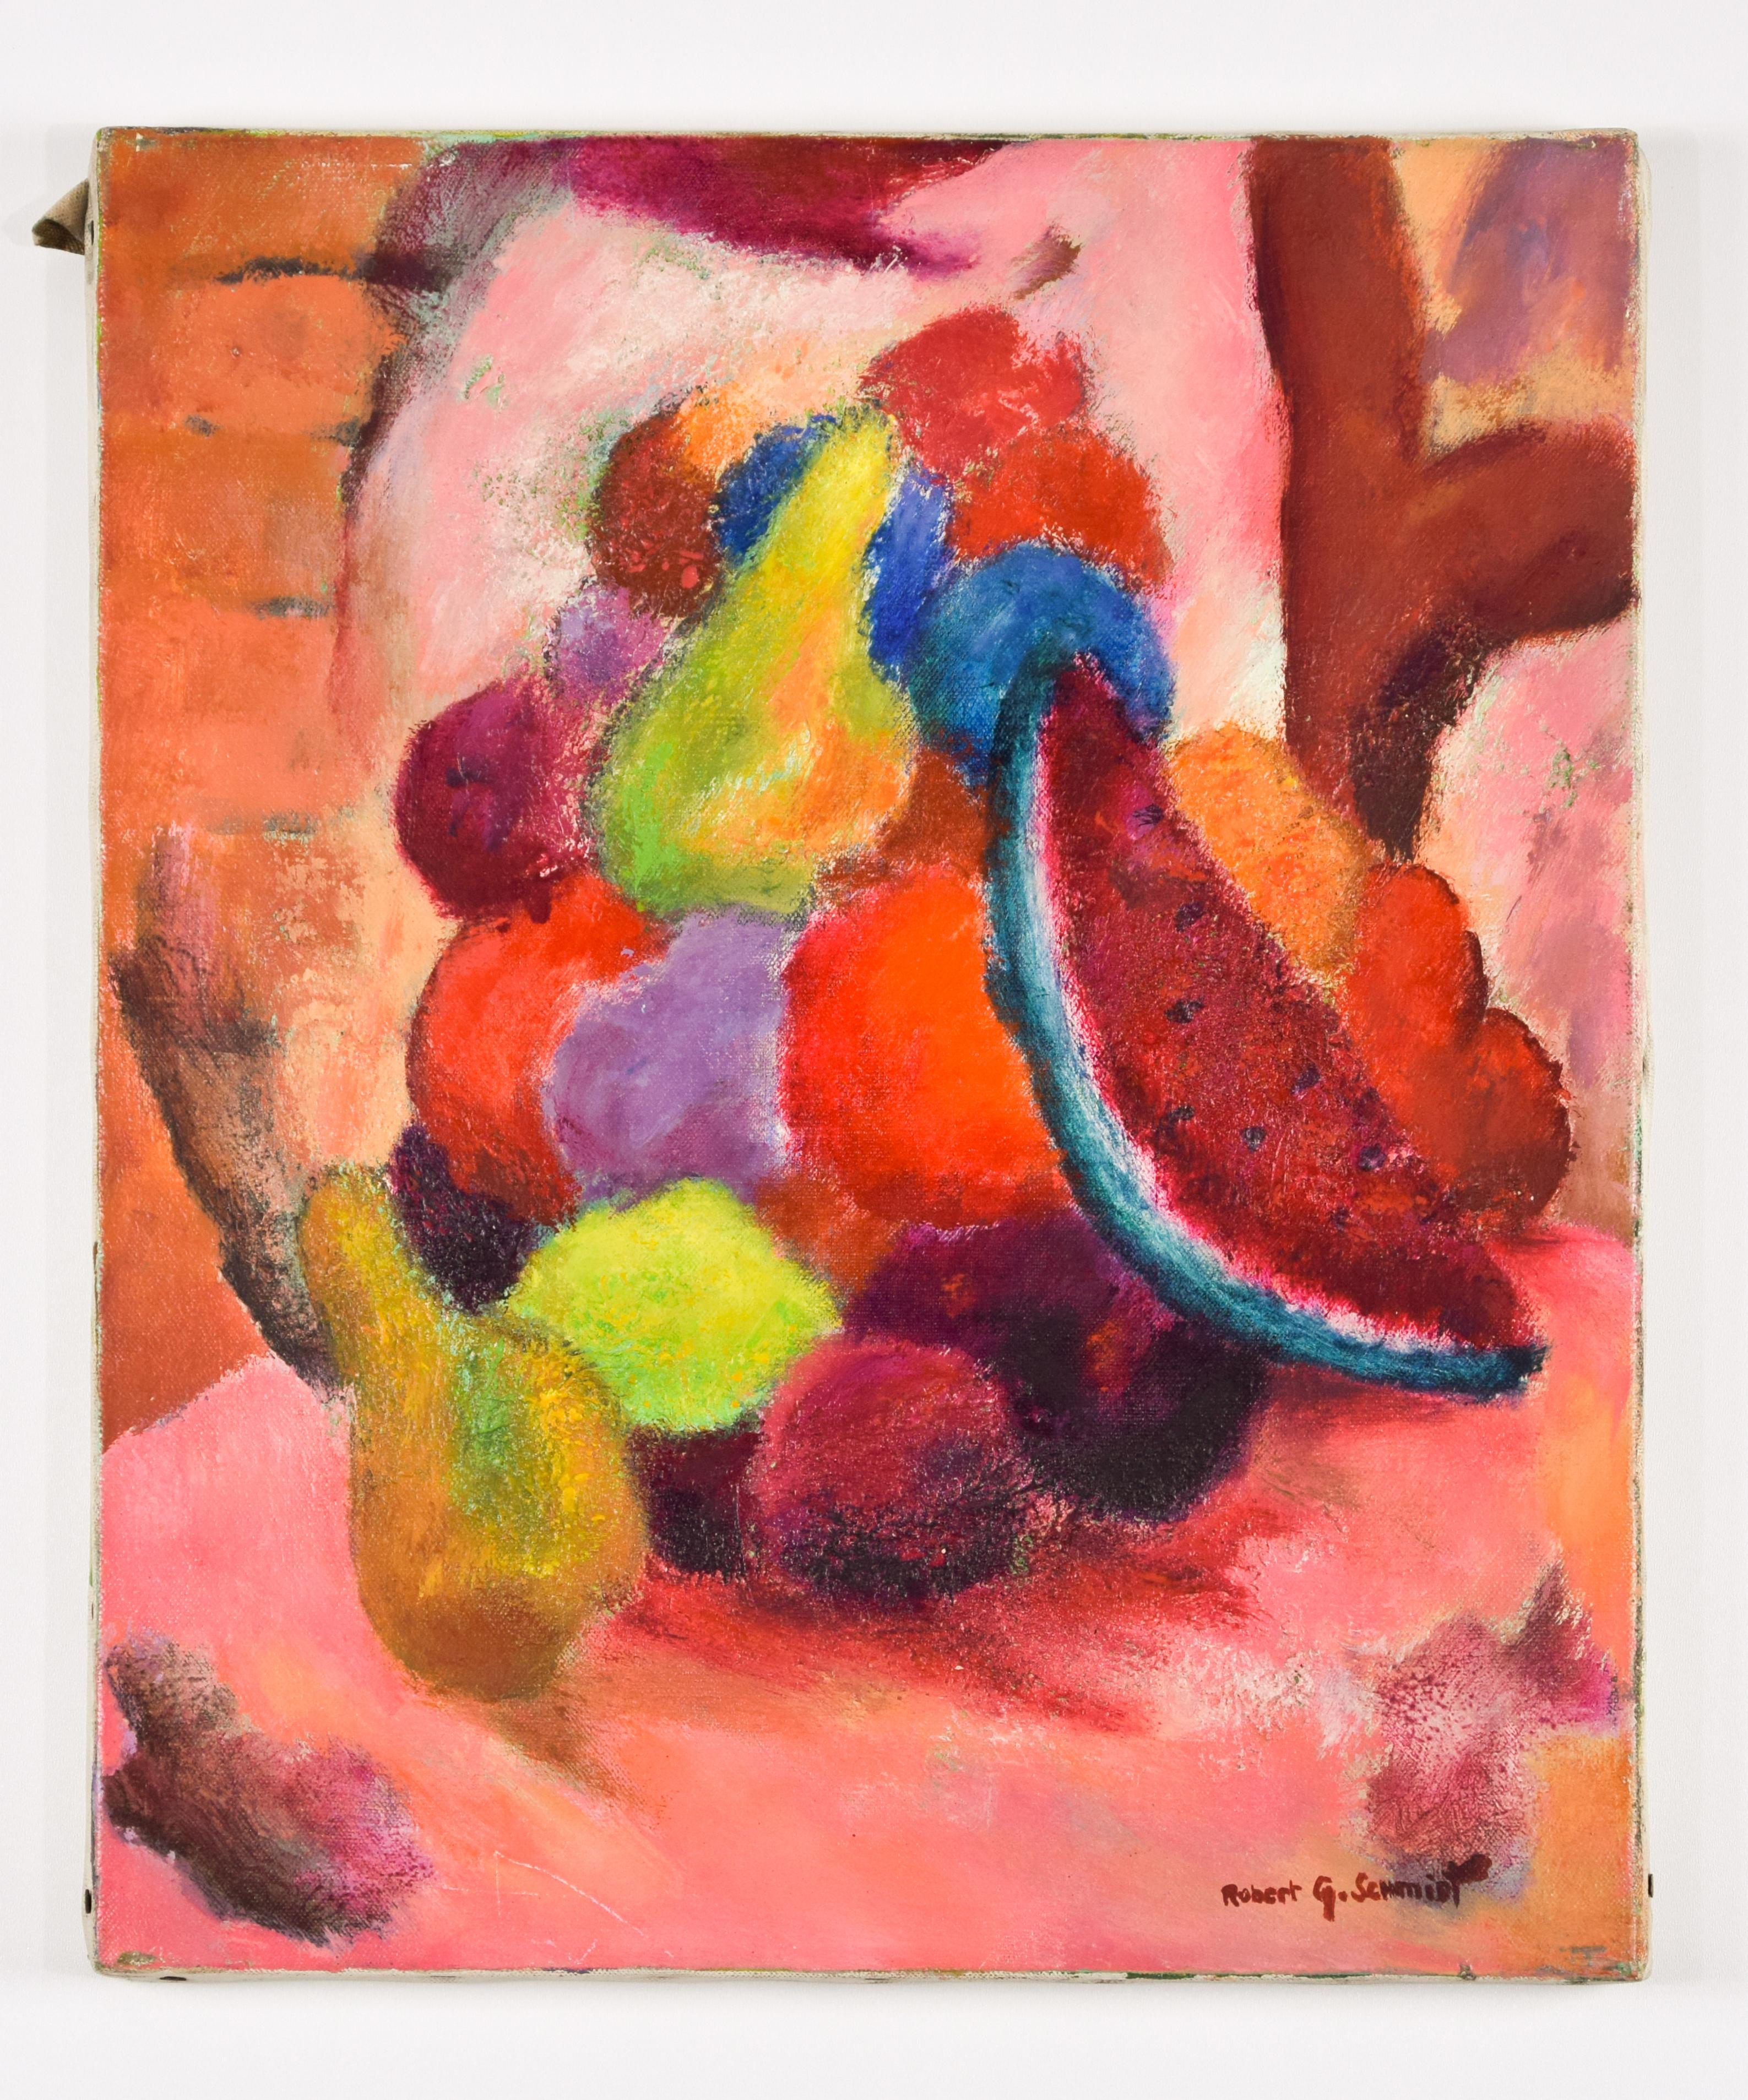 Fruits - Oil on Canvas by Robert G. Schmidt - Mid 1900 For Sale 2